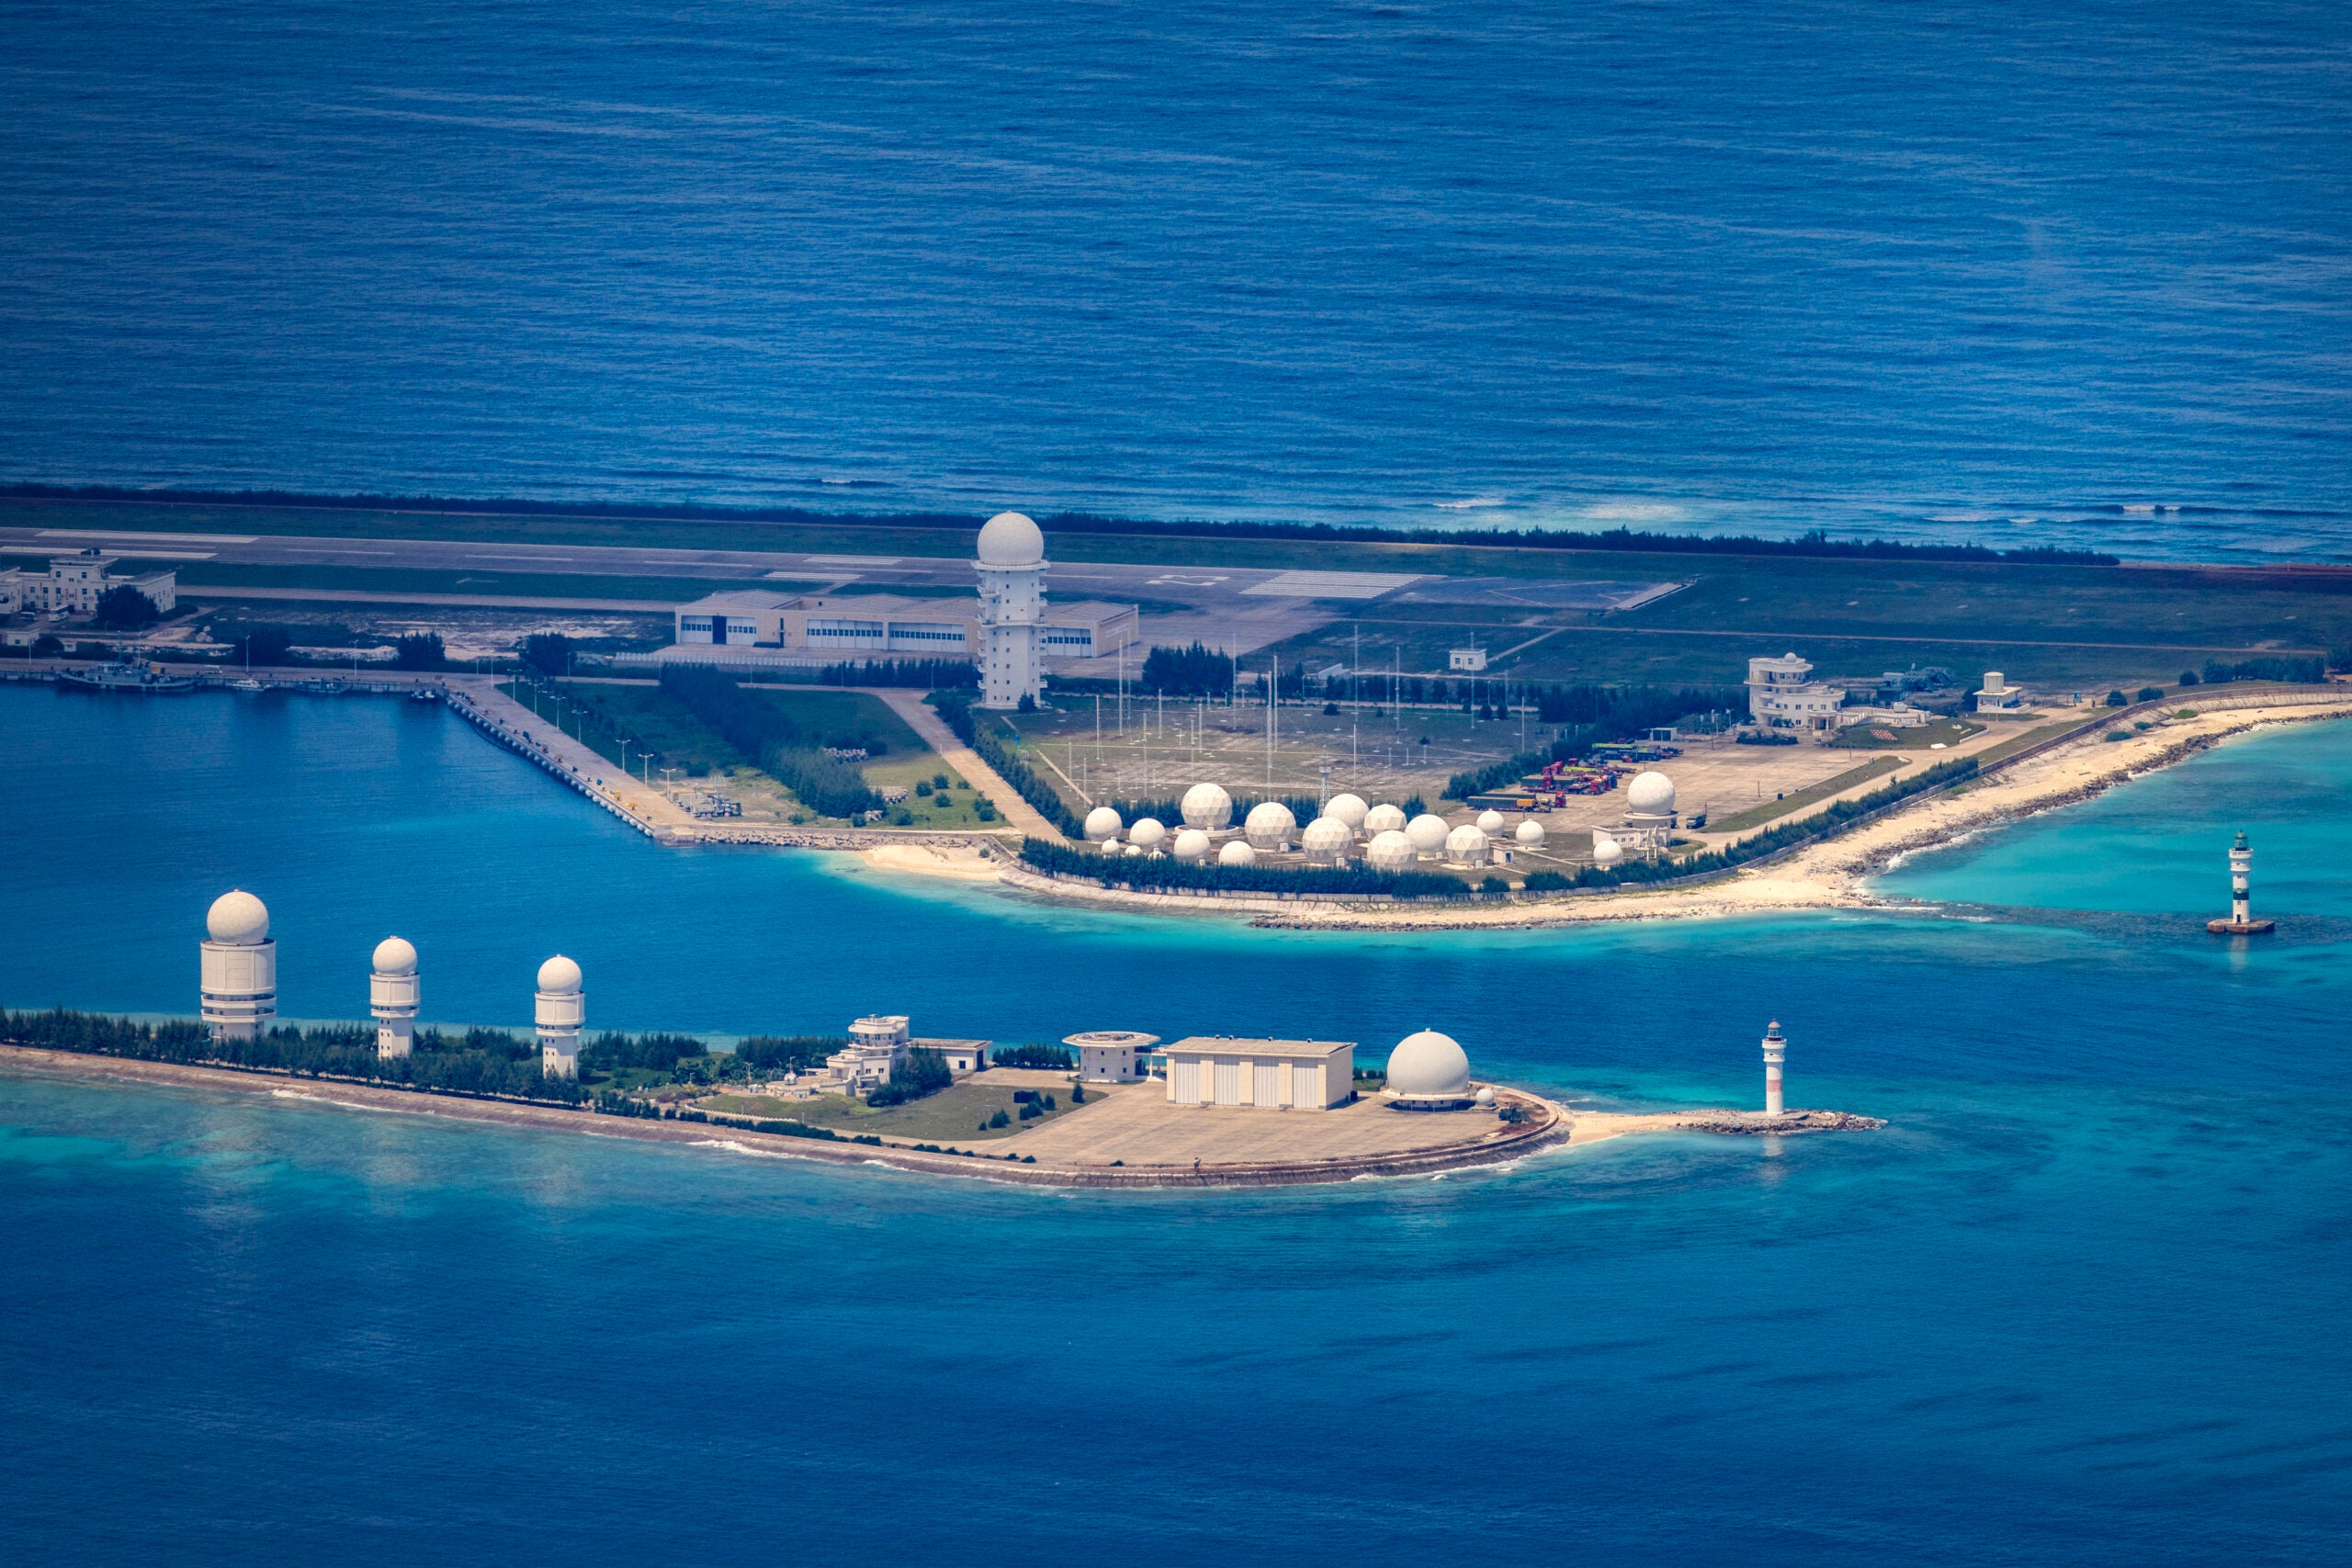 SPRATLY ISLANDS, AT SEA - OCTOBER 25: An airfield, buildings, and structures are seen on the artificial island built by China in Fiery Cross Reef on October 25, 2022 in Spratly Islands, South China Sea. China has progressively asserted its claim of ownership over disputed islands in the South China Sea by artificially increasing the size of islands, creating new islands and building ports, military outposts and airstrips. The South China sea is an important trade route and is of significant interest as geopolitical tensions remain high in the region. (Photo by Ezra Acayan/Getty Images)